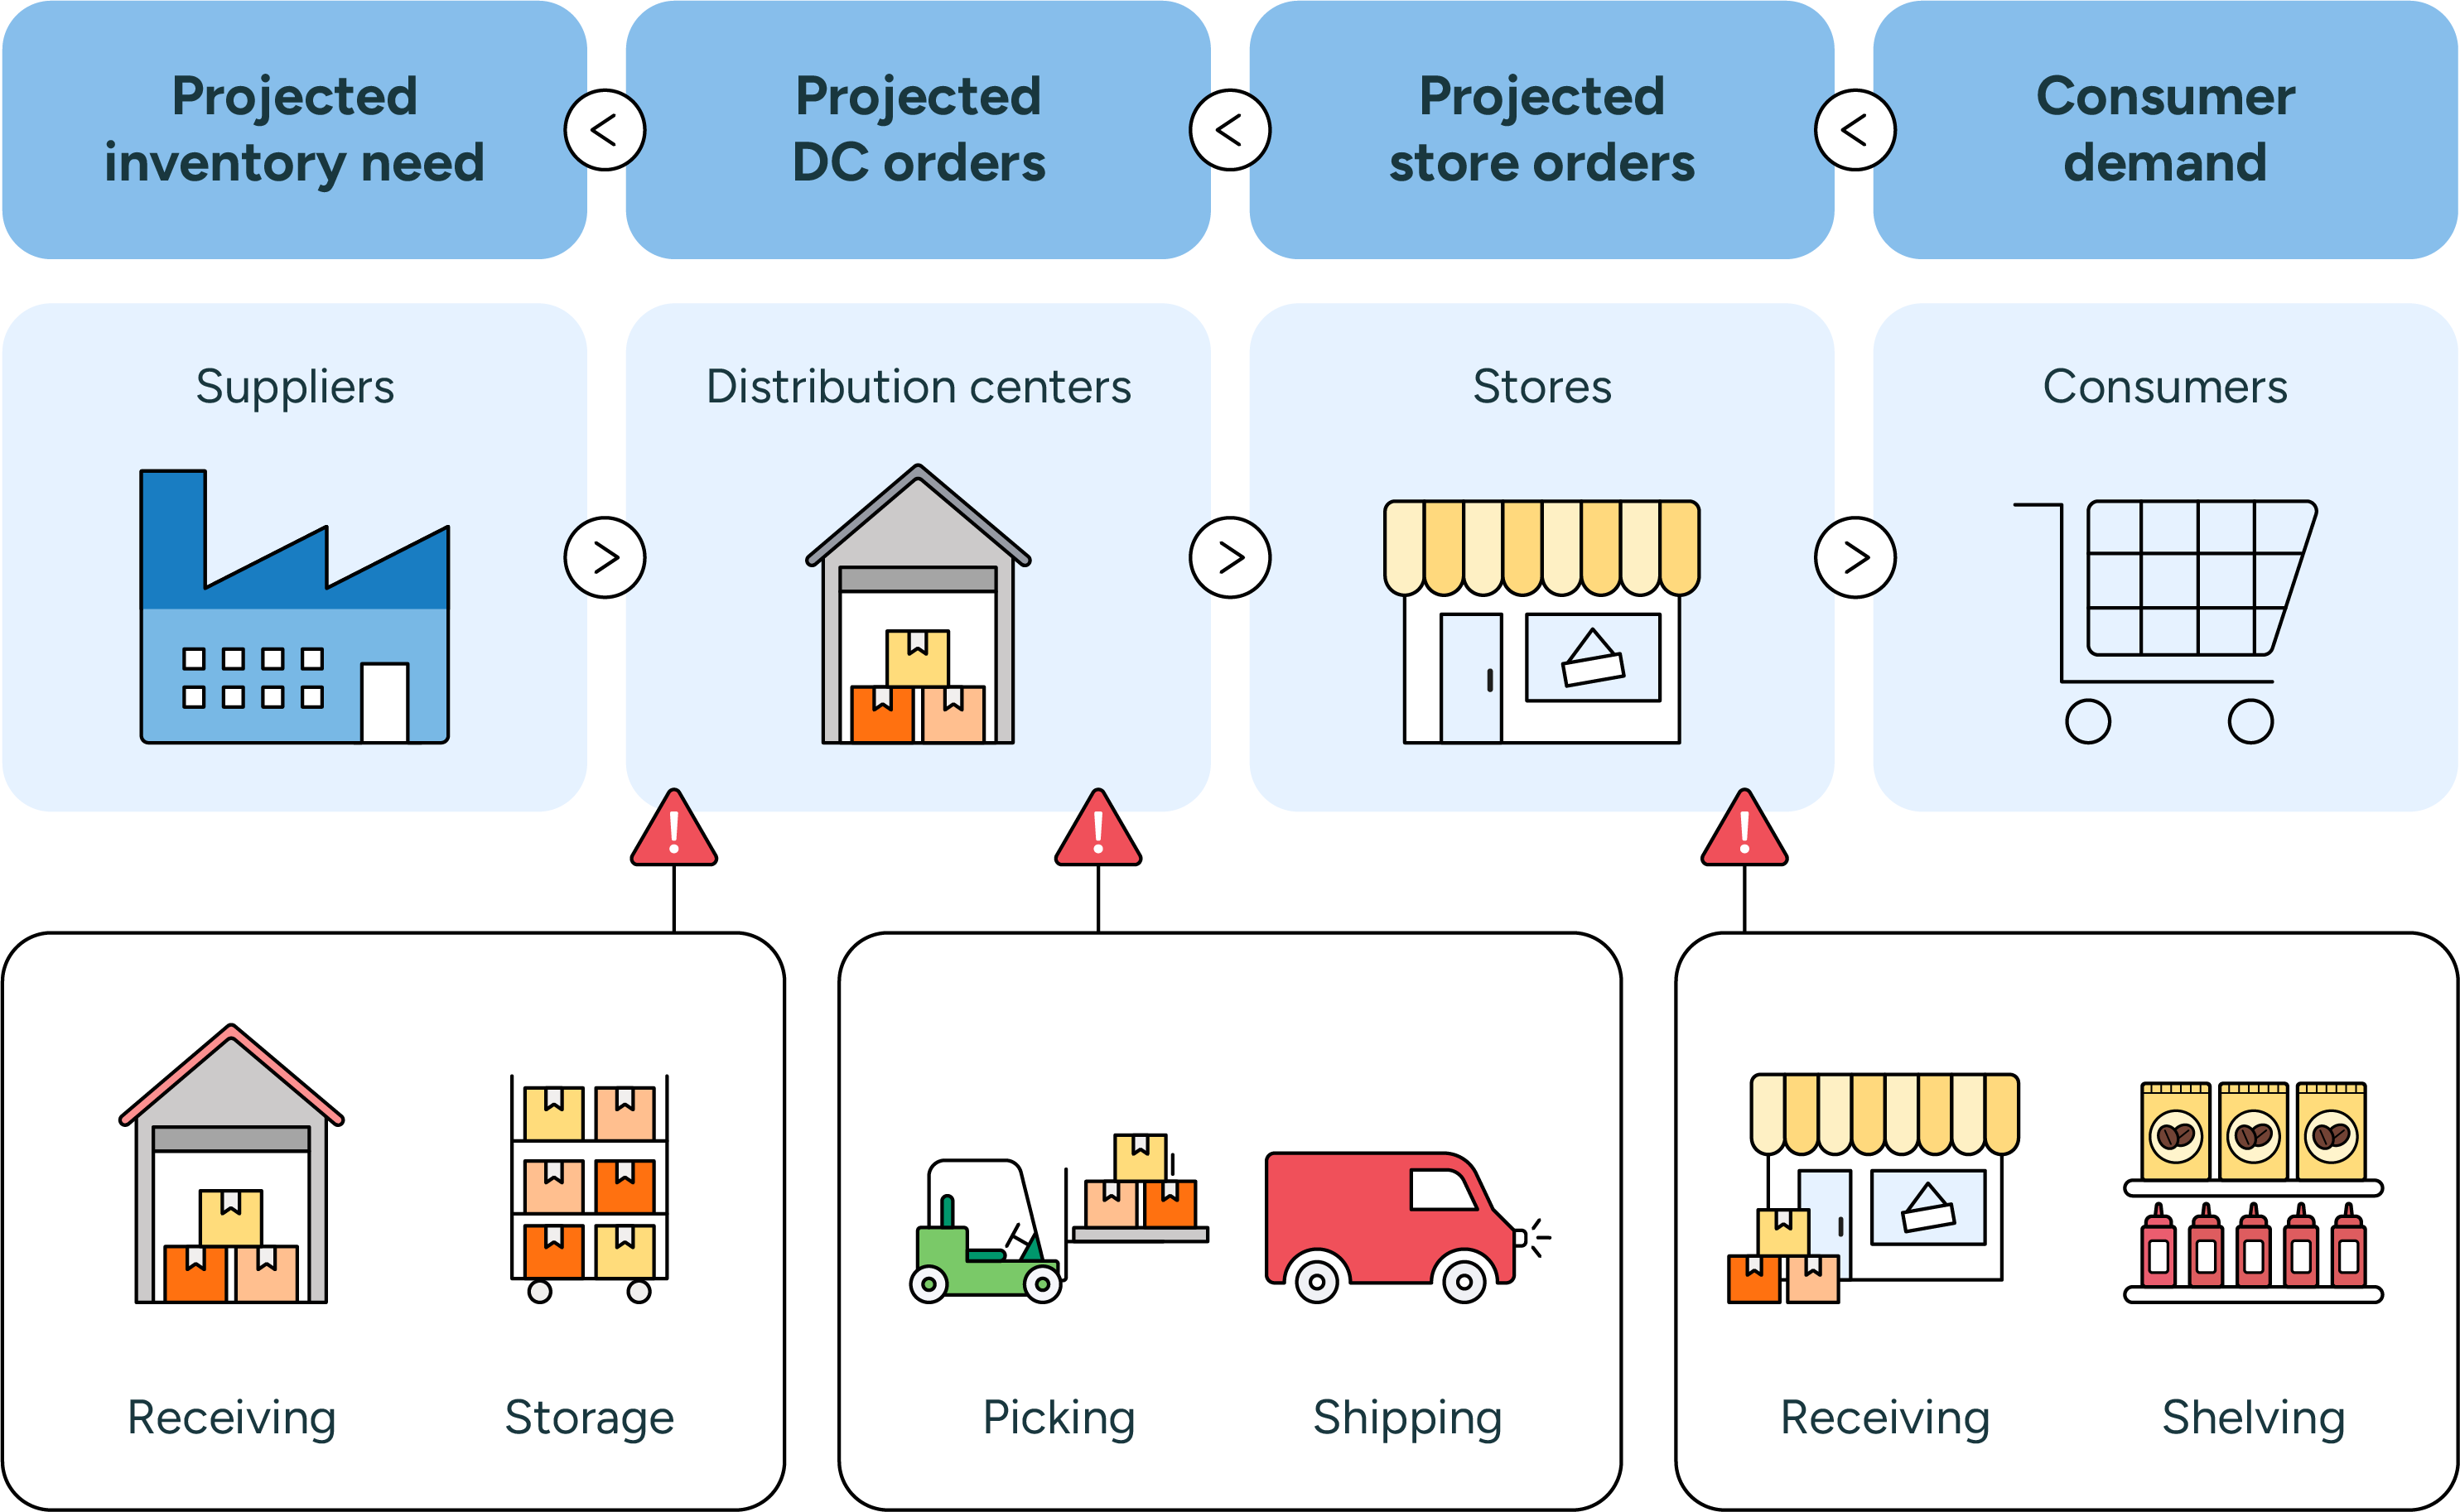 An illustration showing visibility into the end-to-end retail supply chain.